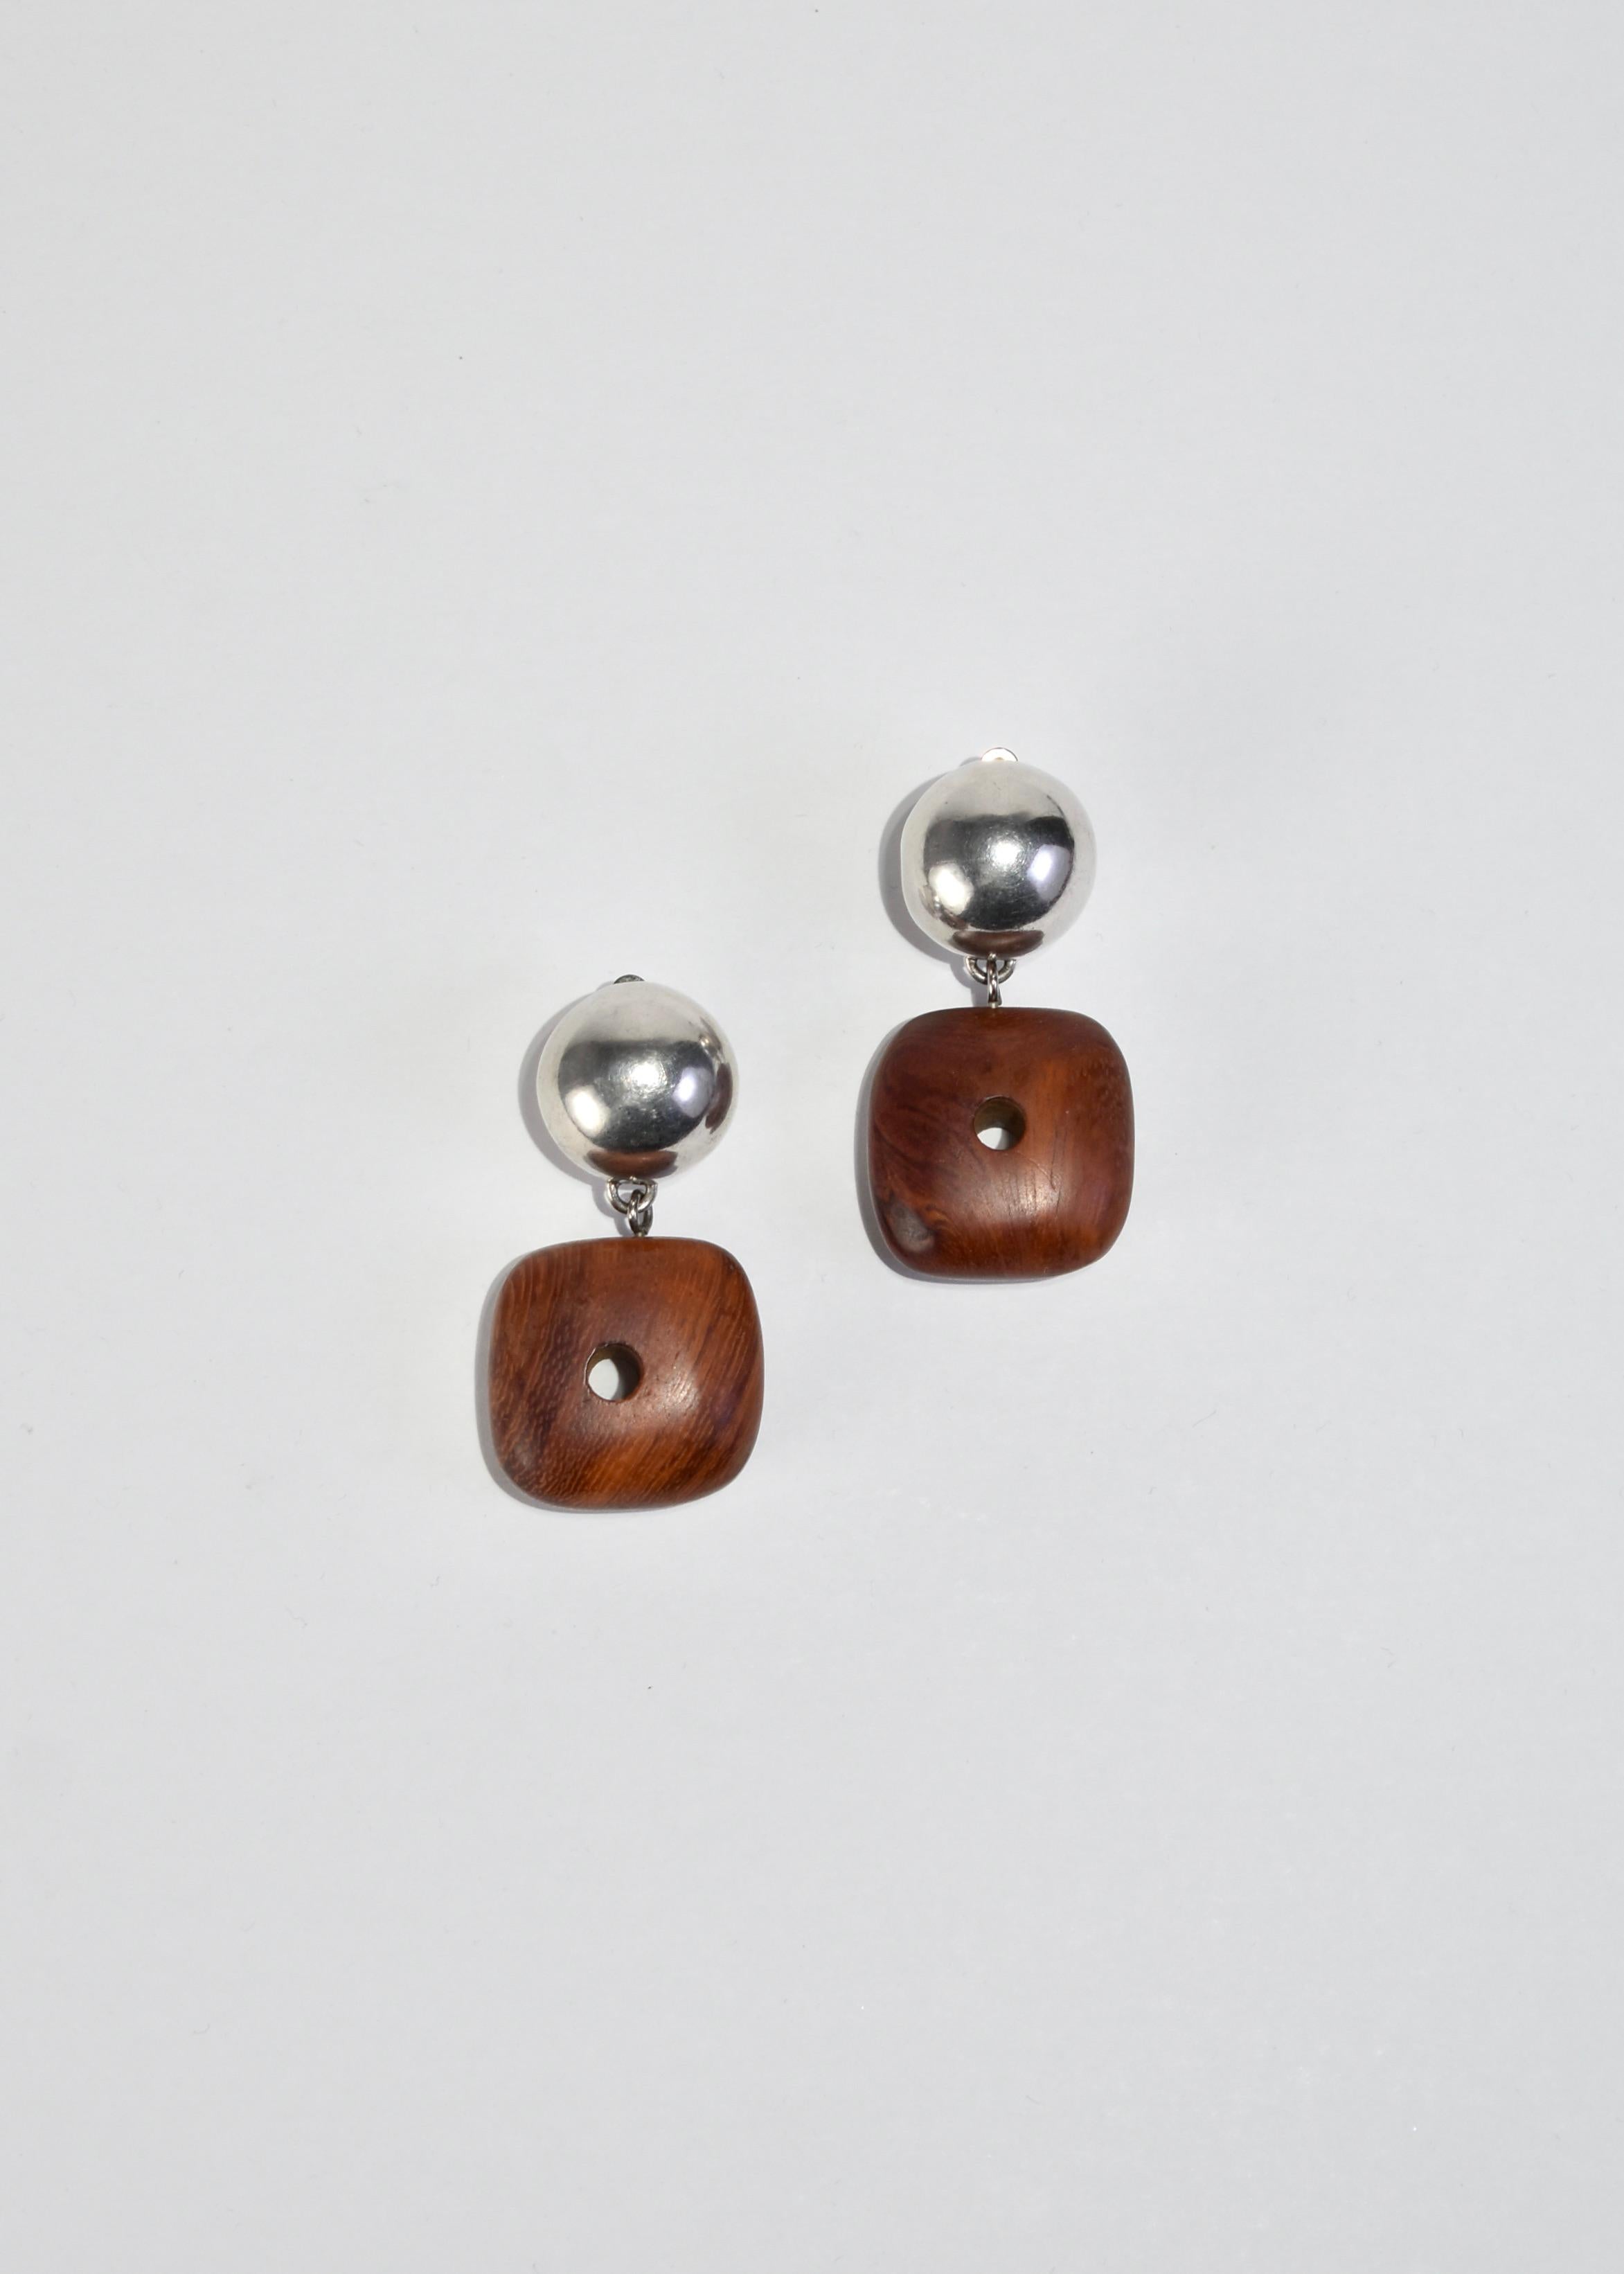 Stunning vintage silver earrings with oversized wood detail, clip-on. Stamped 925.